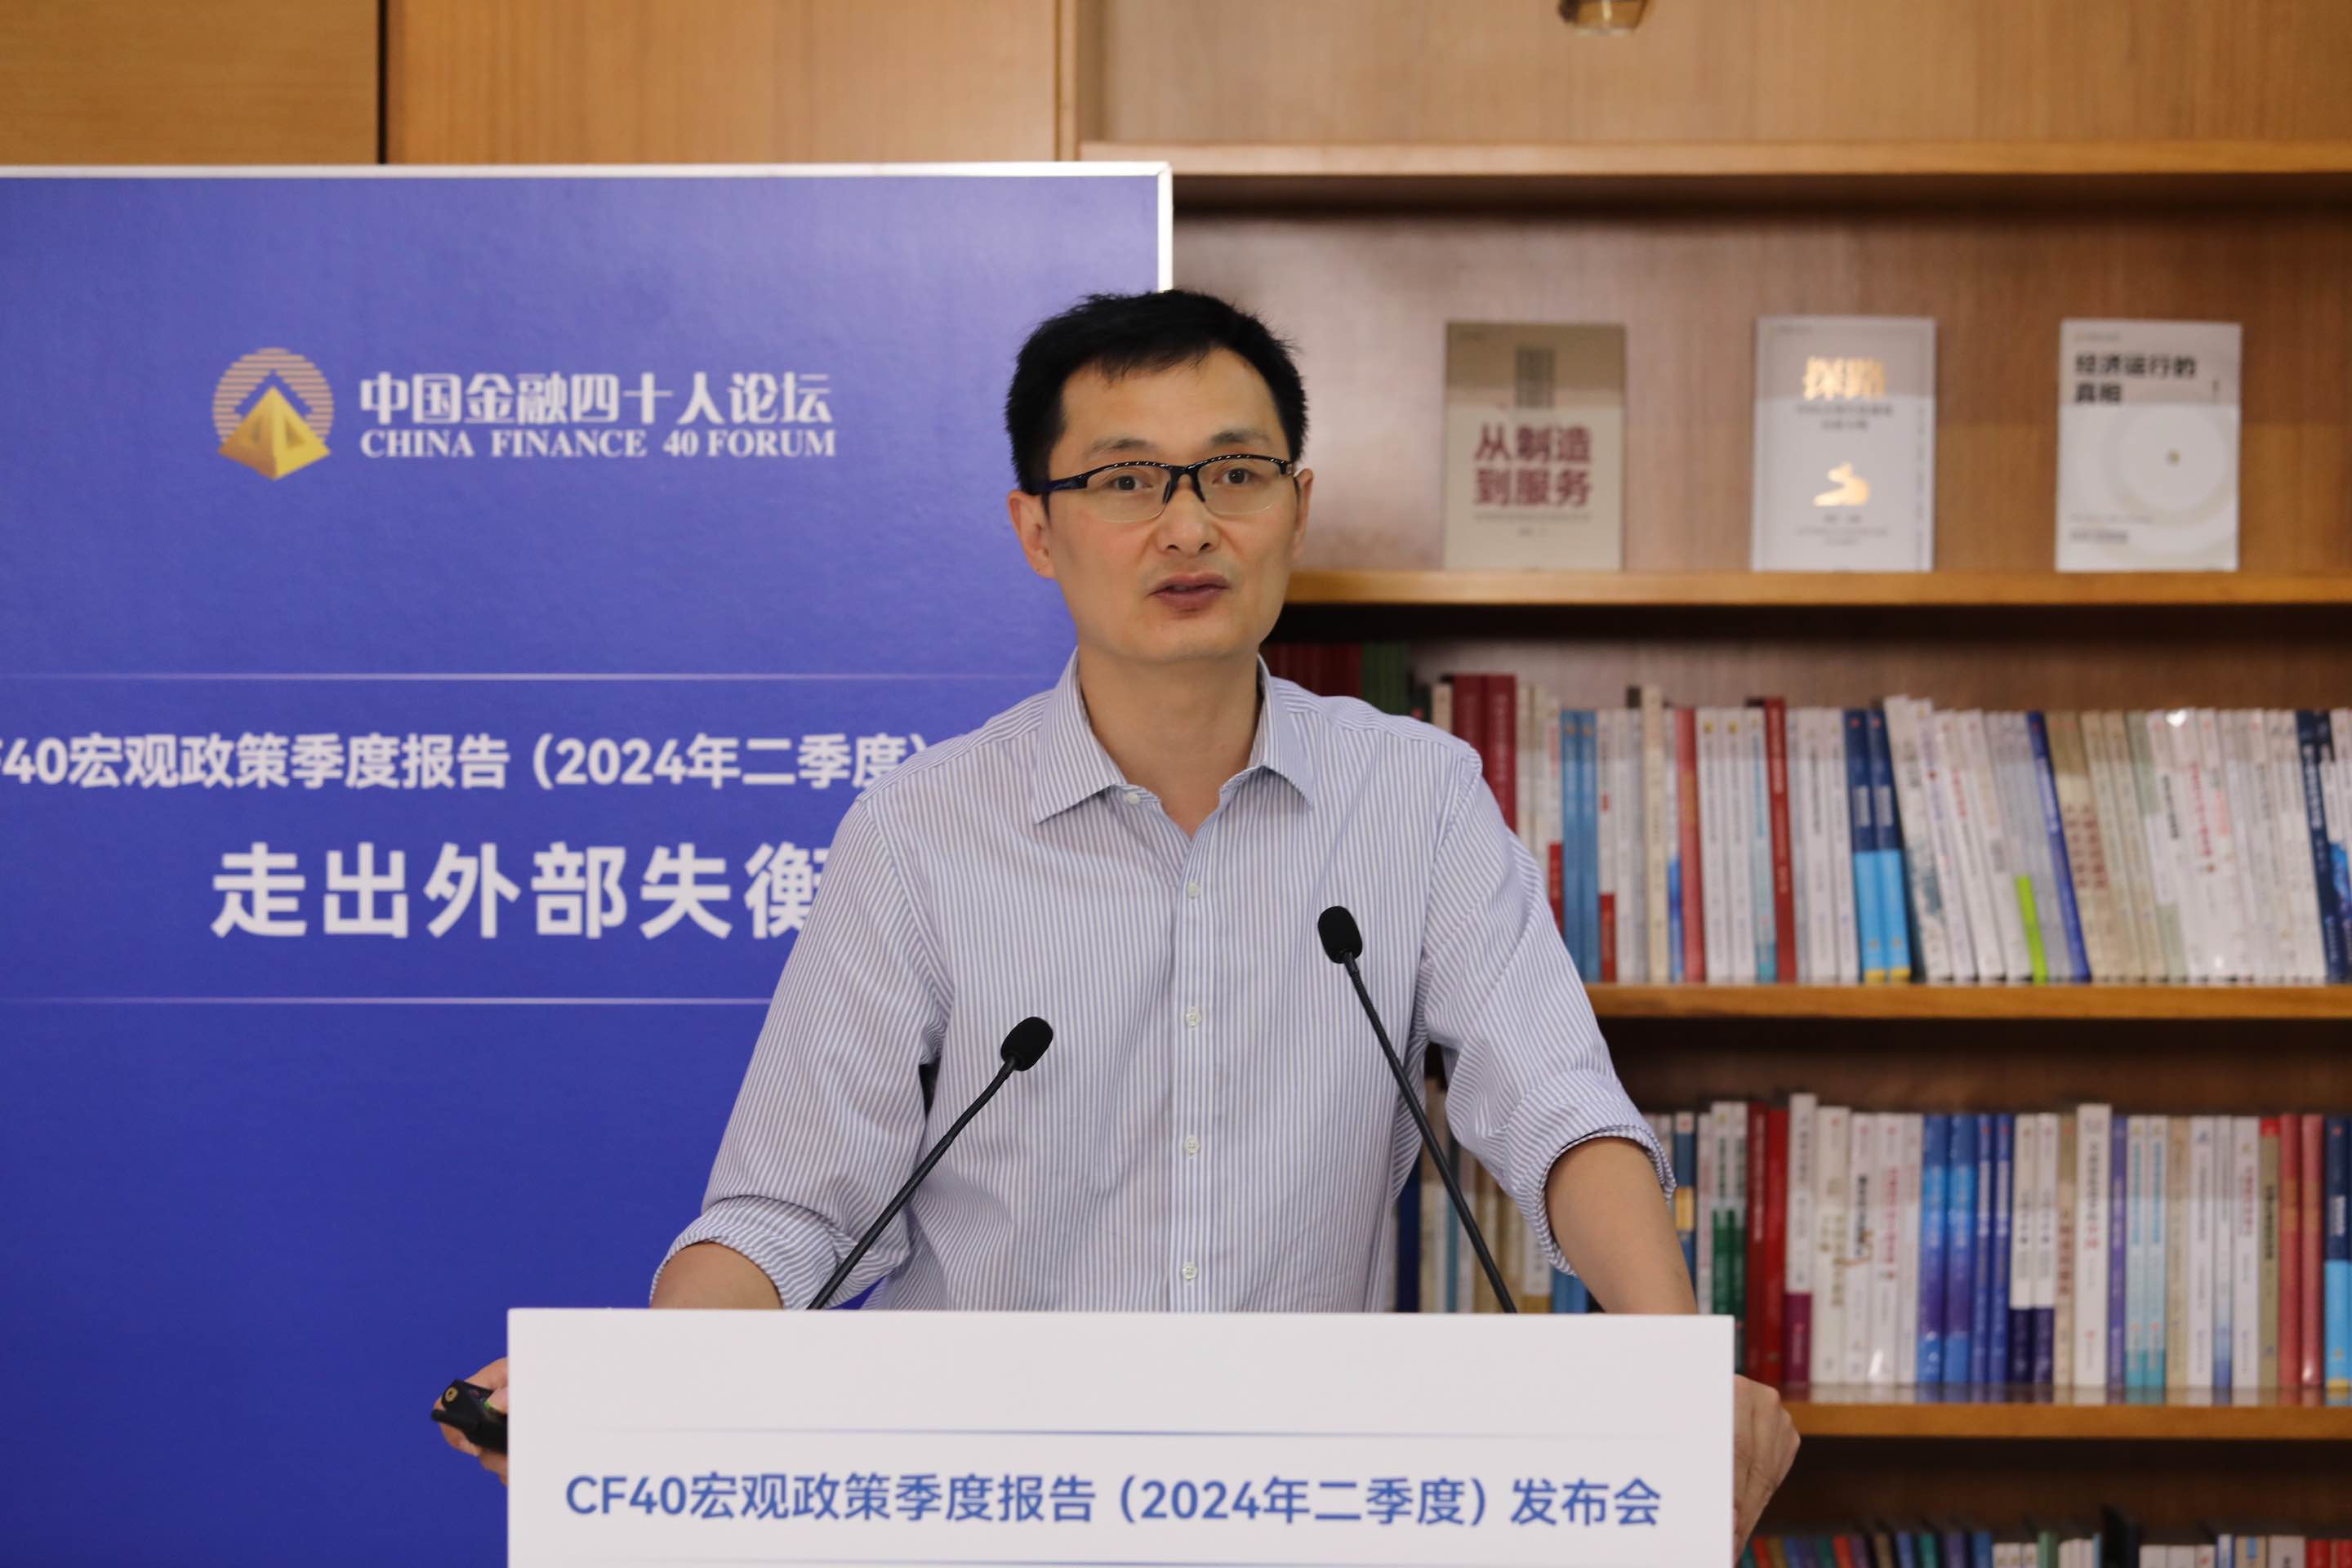 Zhang Bin, non-resident senior fellow at the China Finance 40 Forum and deputy director of the Institute of World Economics and Politics of Chinese Academy of Social Sciences, speaking at a media conference in Beijing, China, July 22, 2024. /CF40